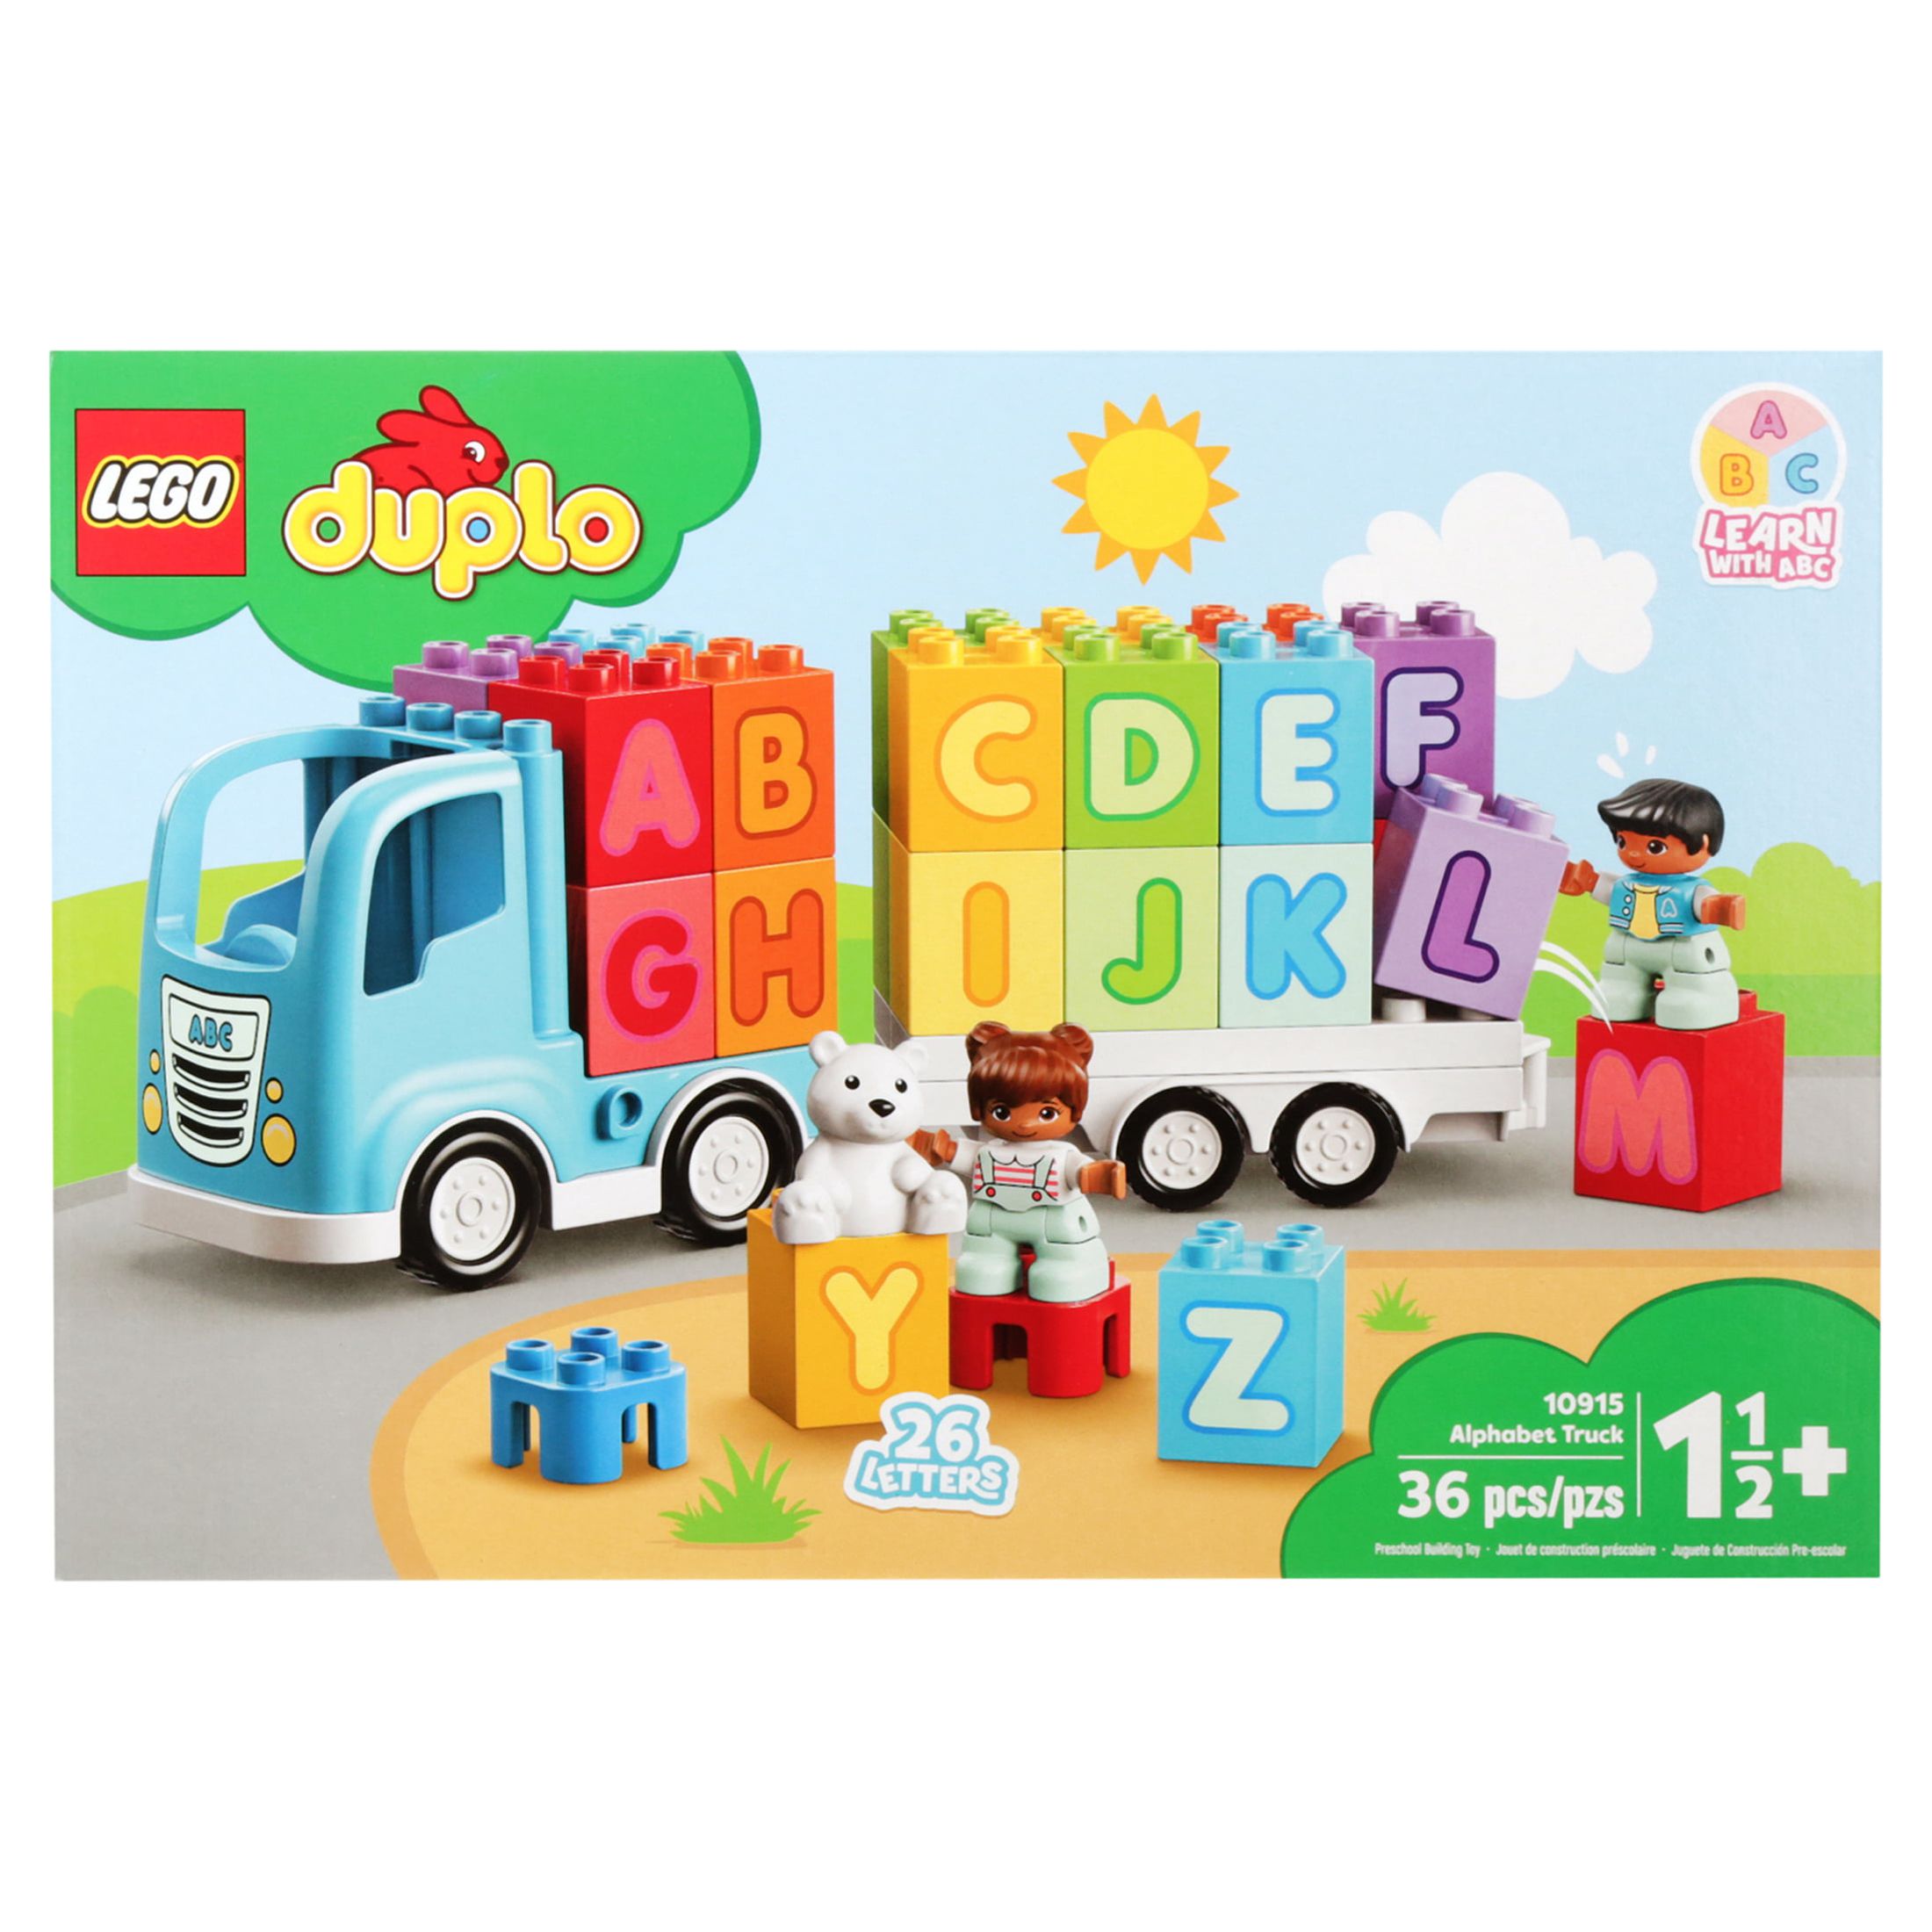 LEGO DUPLO My First Alphabet Truck 10915 Educational Building Toy for Toddlers (36 Pieces) - image 8 of 12